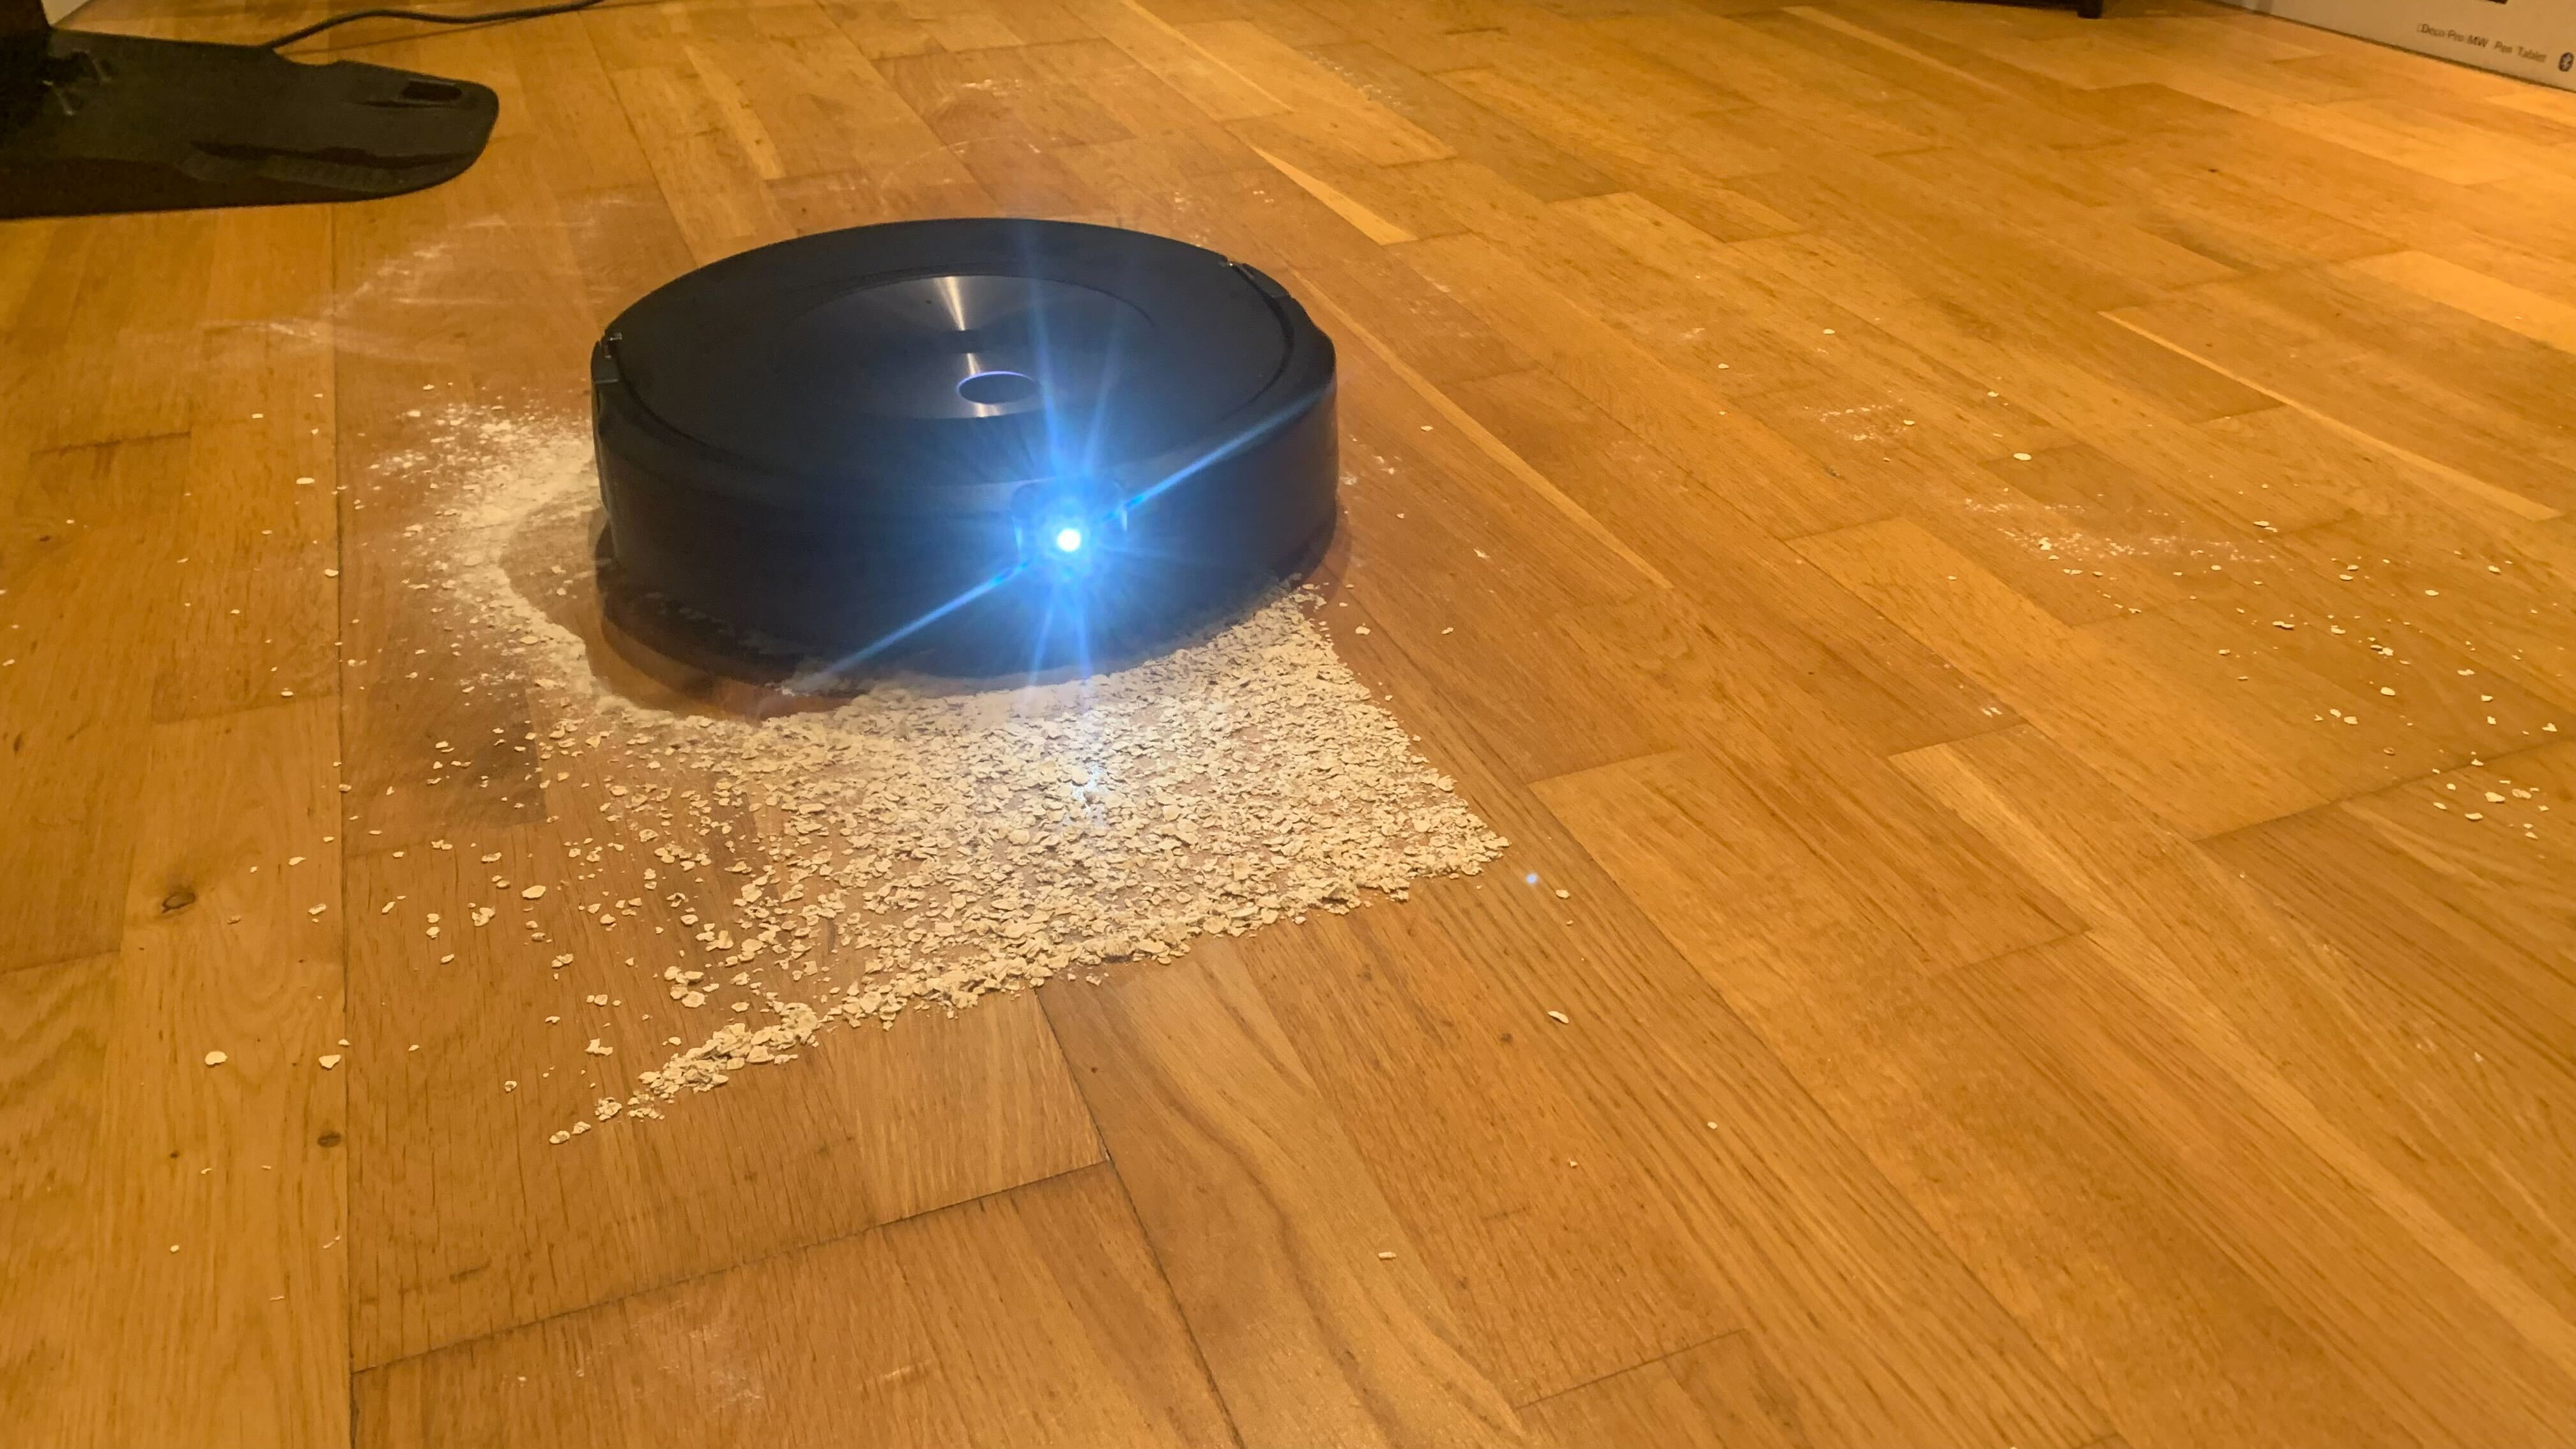 The floor with scattered oats and flour during the iRobot Roomba Combo j7+'s clean up of a heavy spill